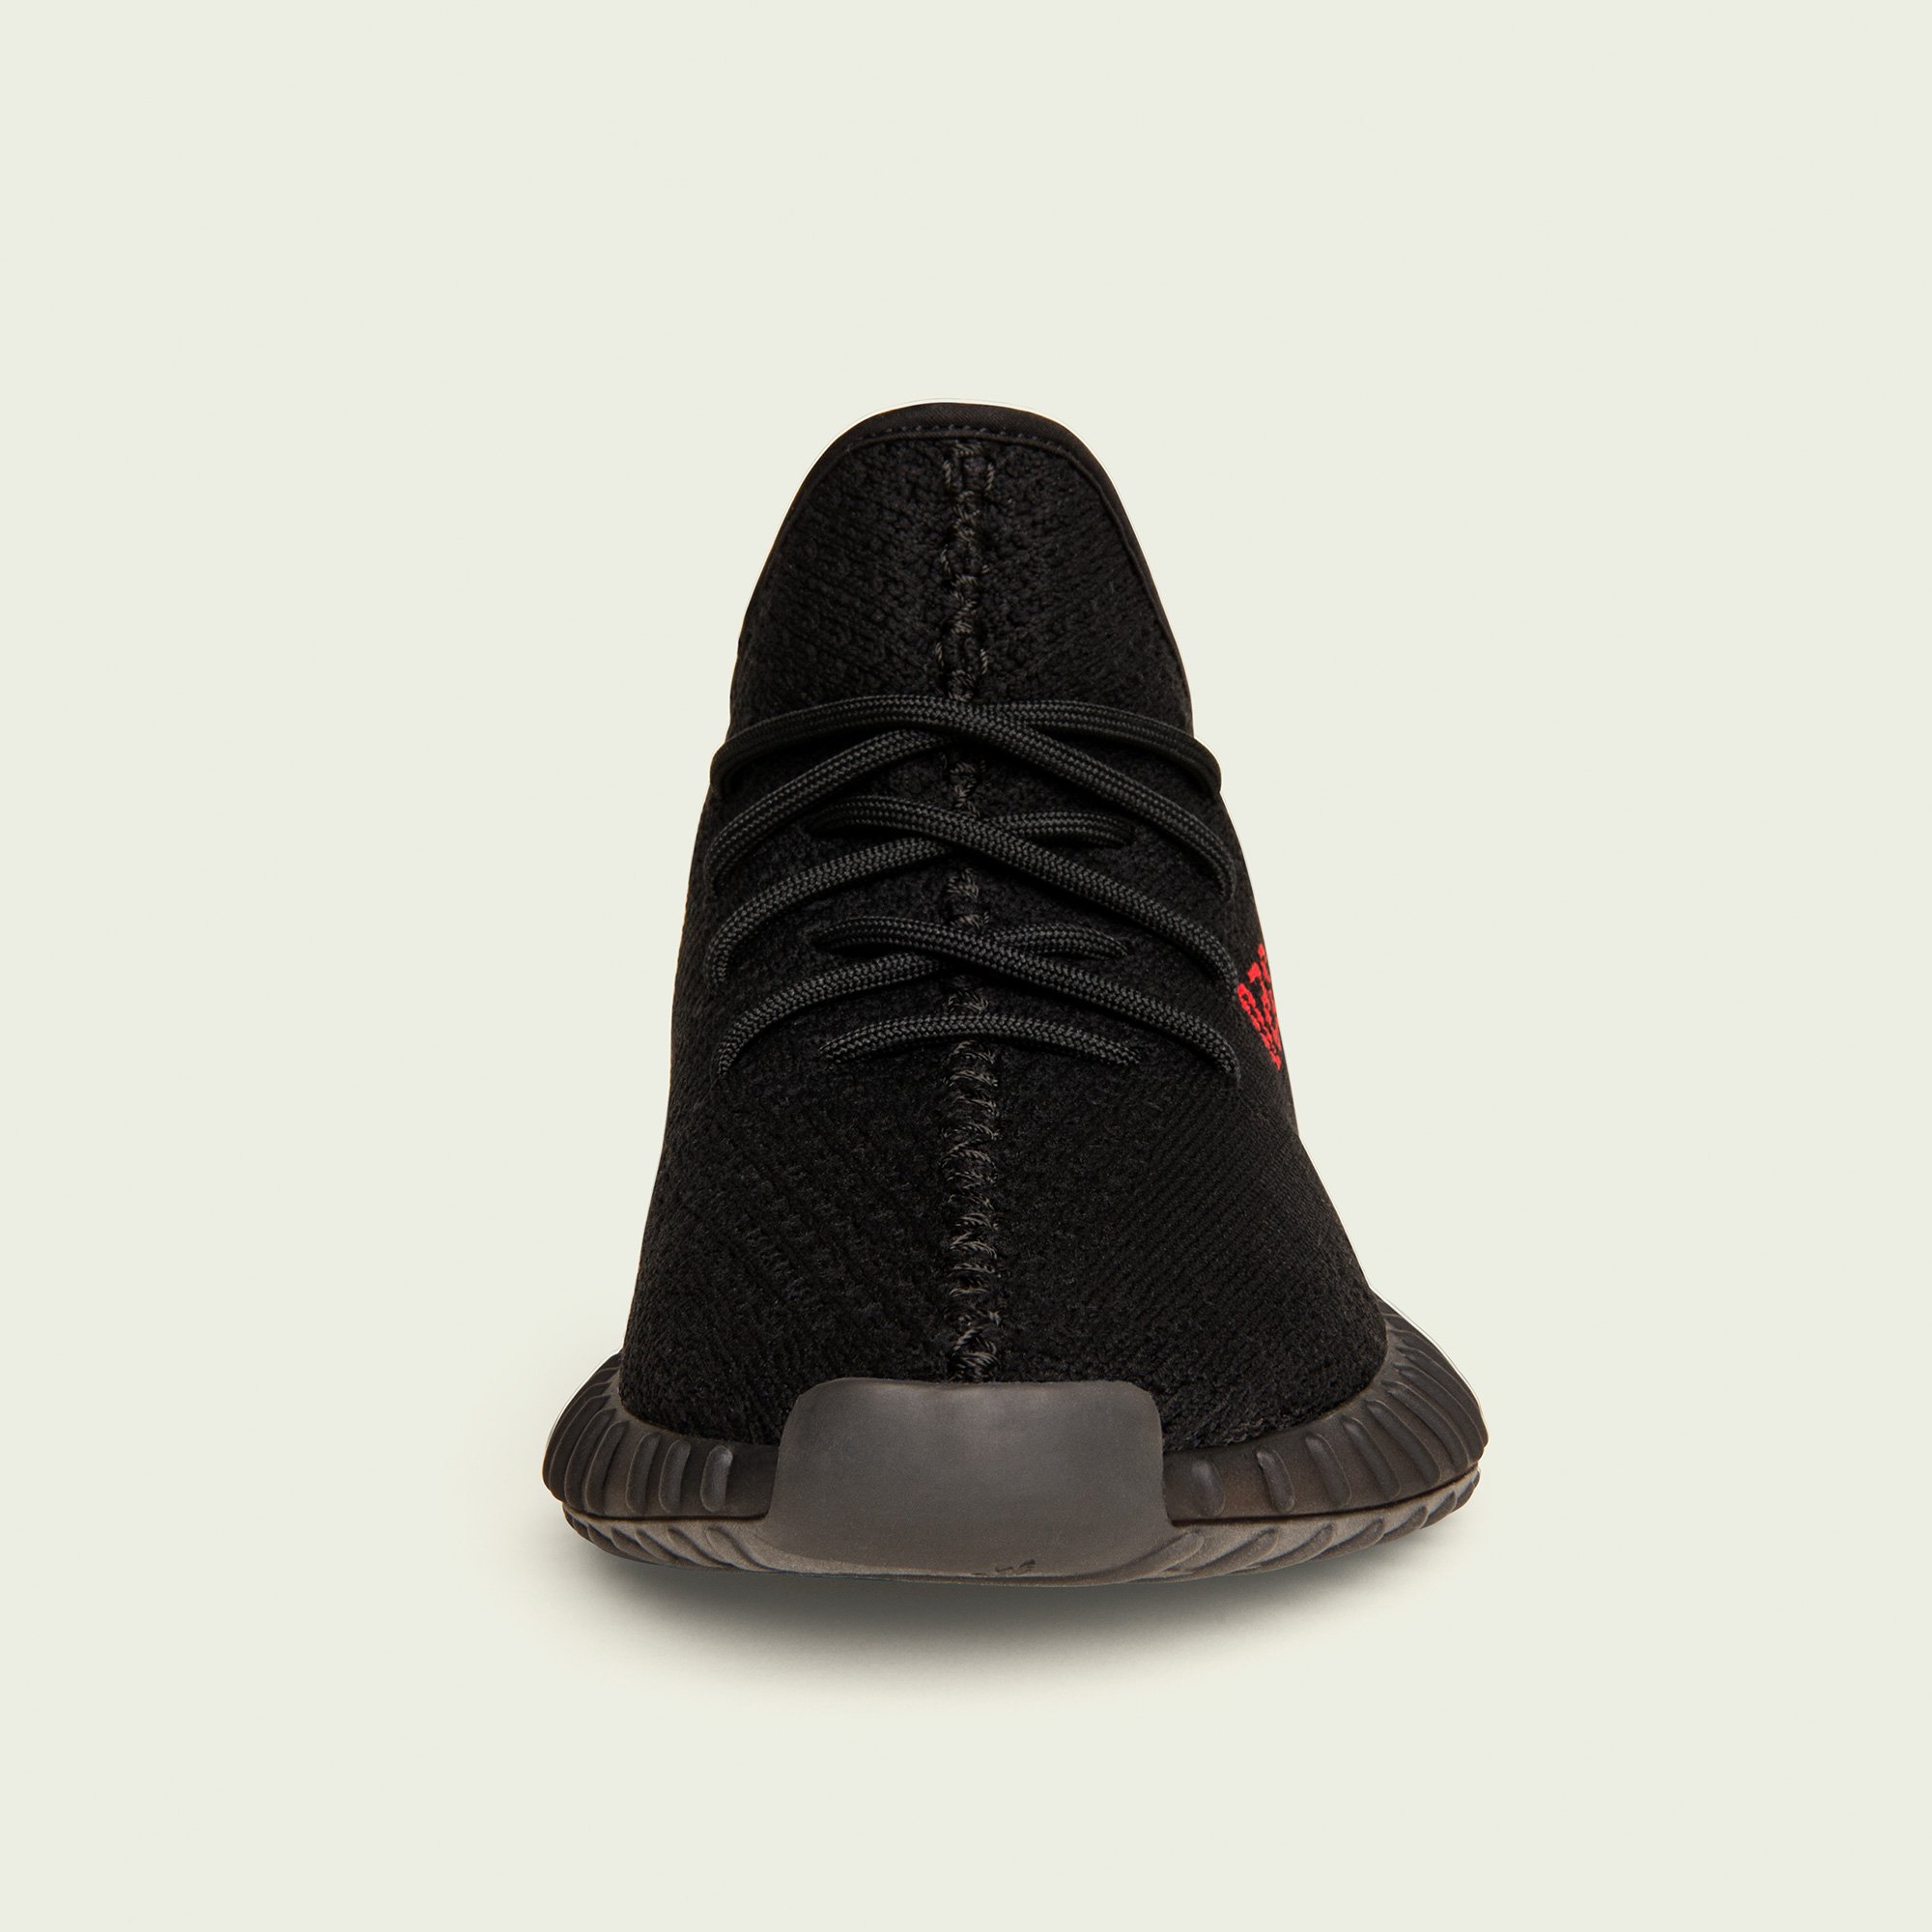 adidas-yeezy-boost-350-v2-core-black-red-4